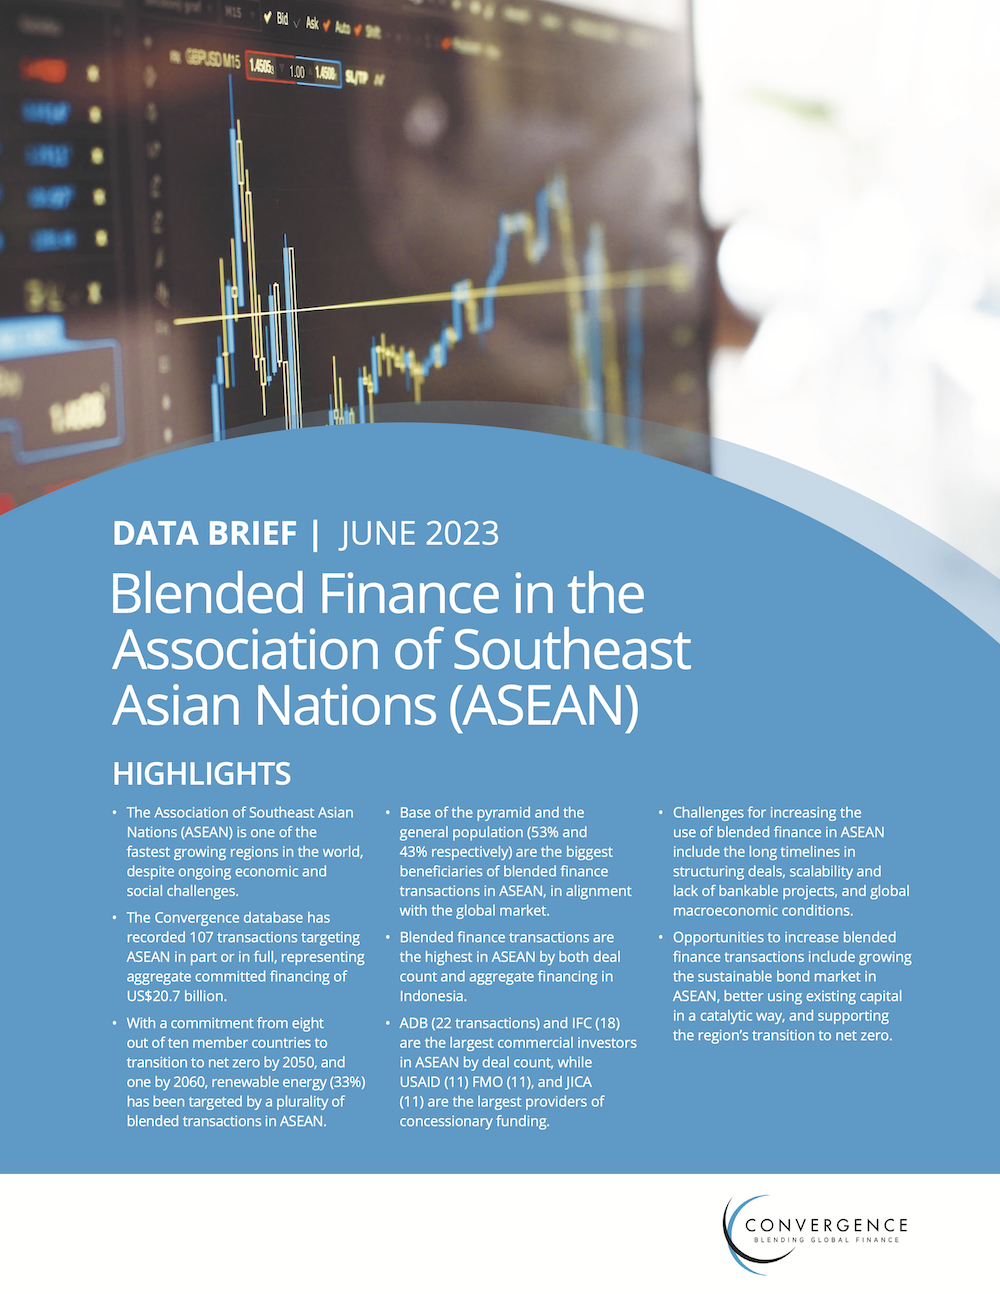 Blended Finance in the Association of Southeast Asian Nations (ASEAN)